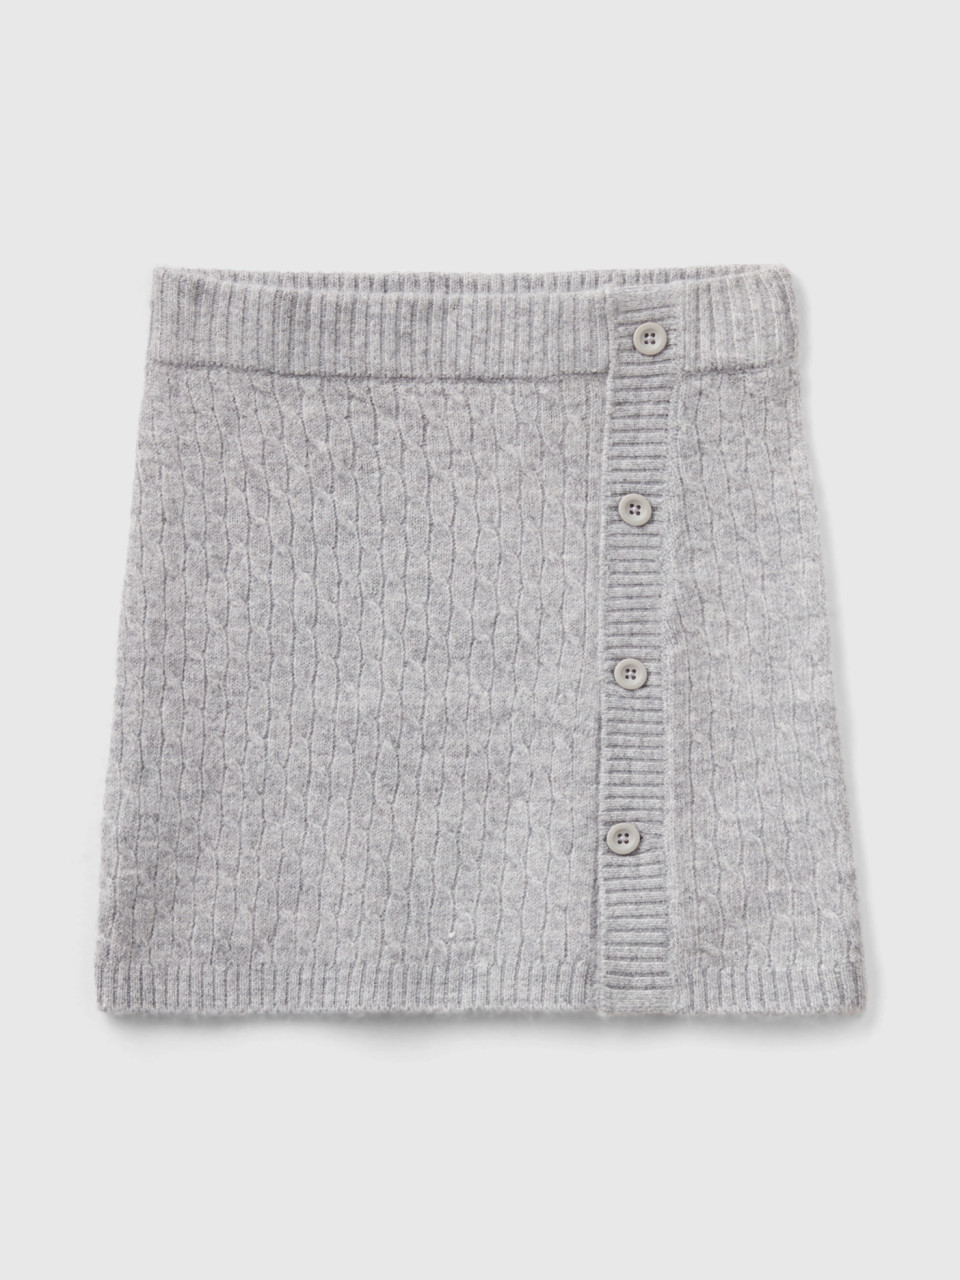 Benetton, Sweater With Cables, Gray, Kids